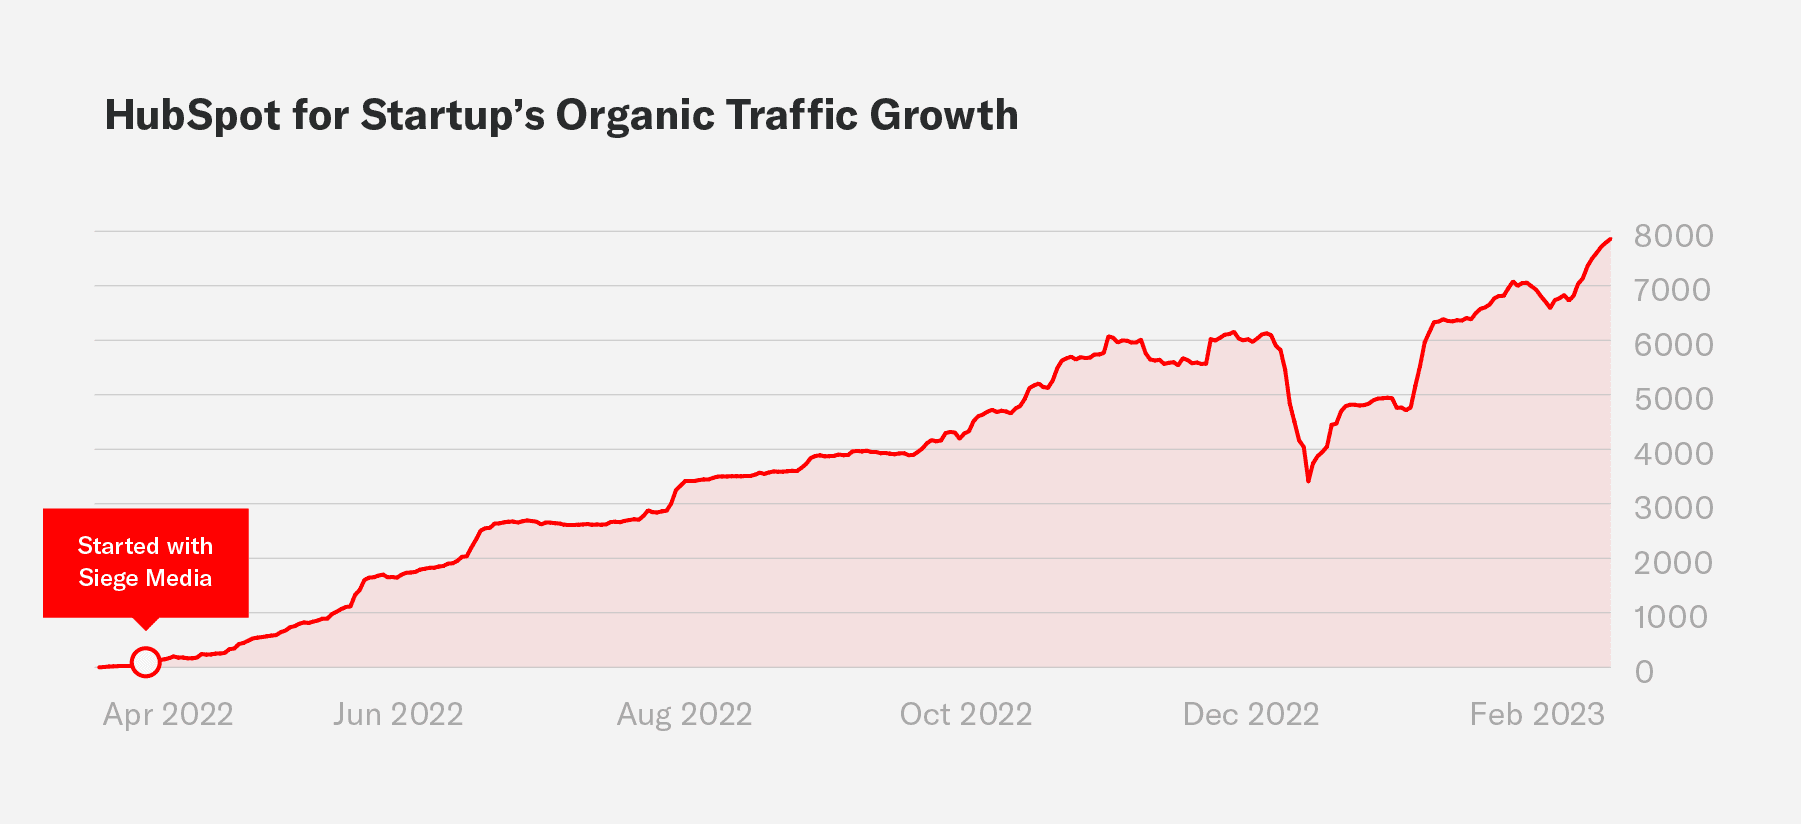 A graph that represents how Siege Media increased organic traffic growth for HubSpot